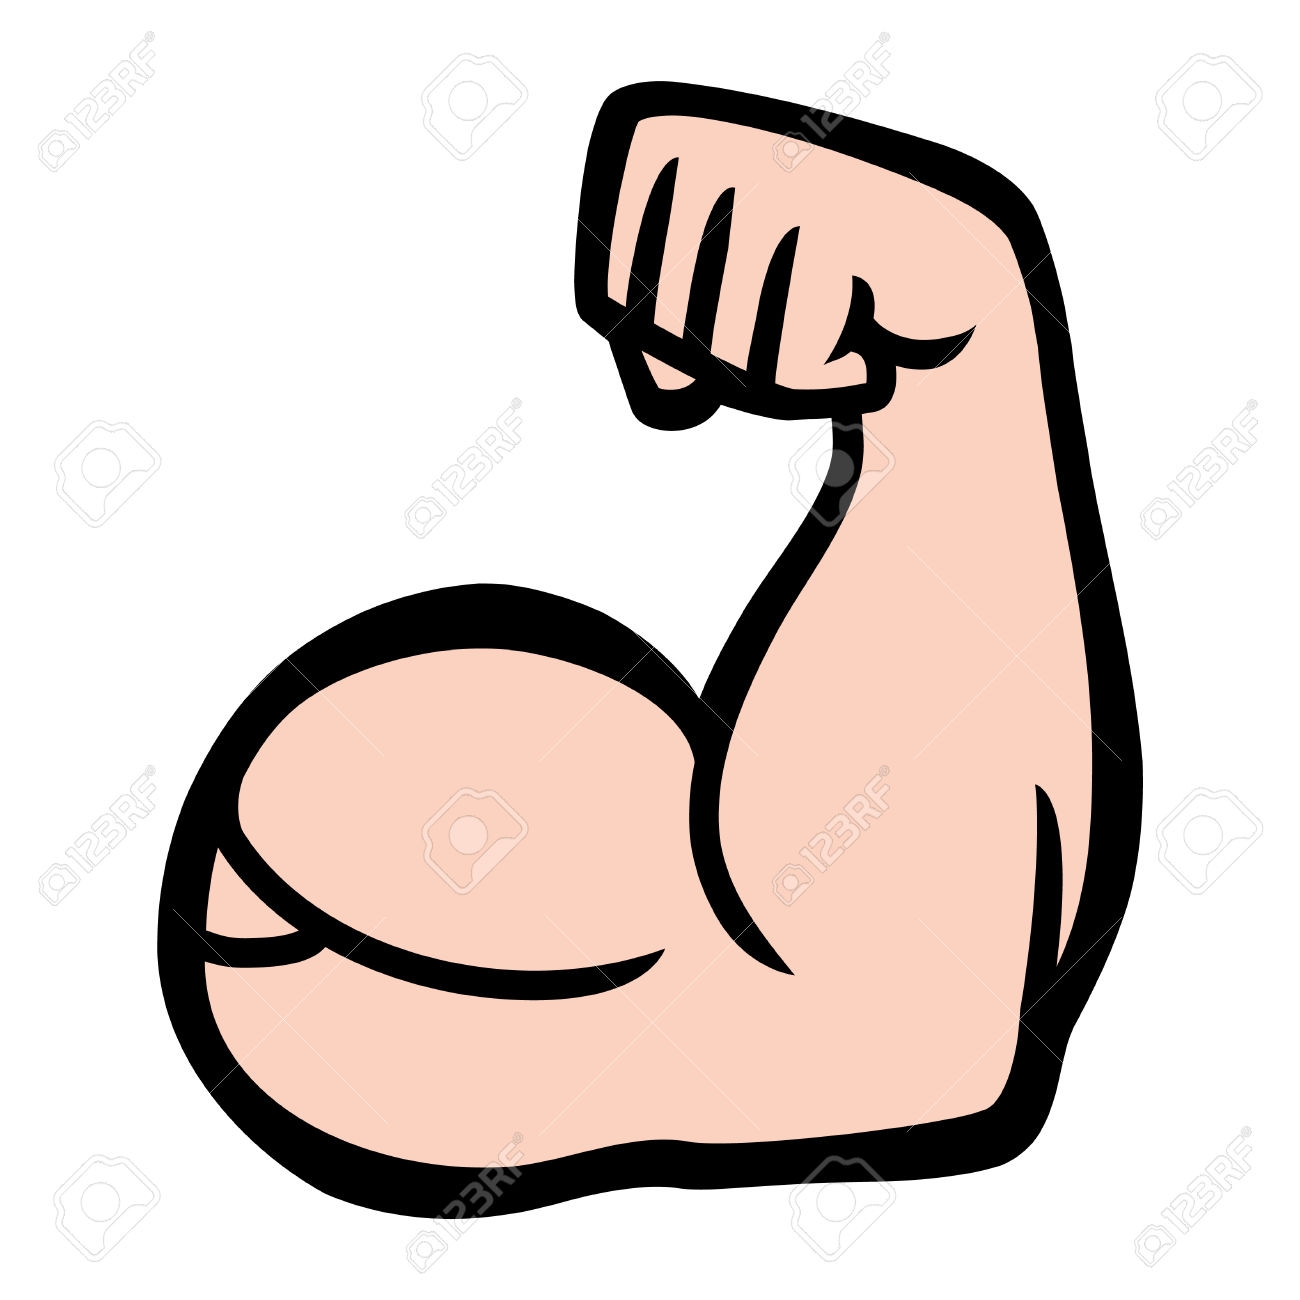 New gallery digital collection. Muscles clipart